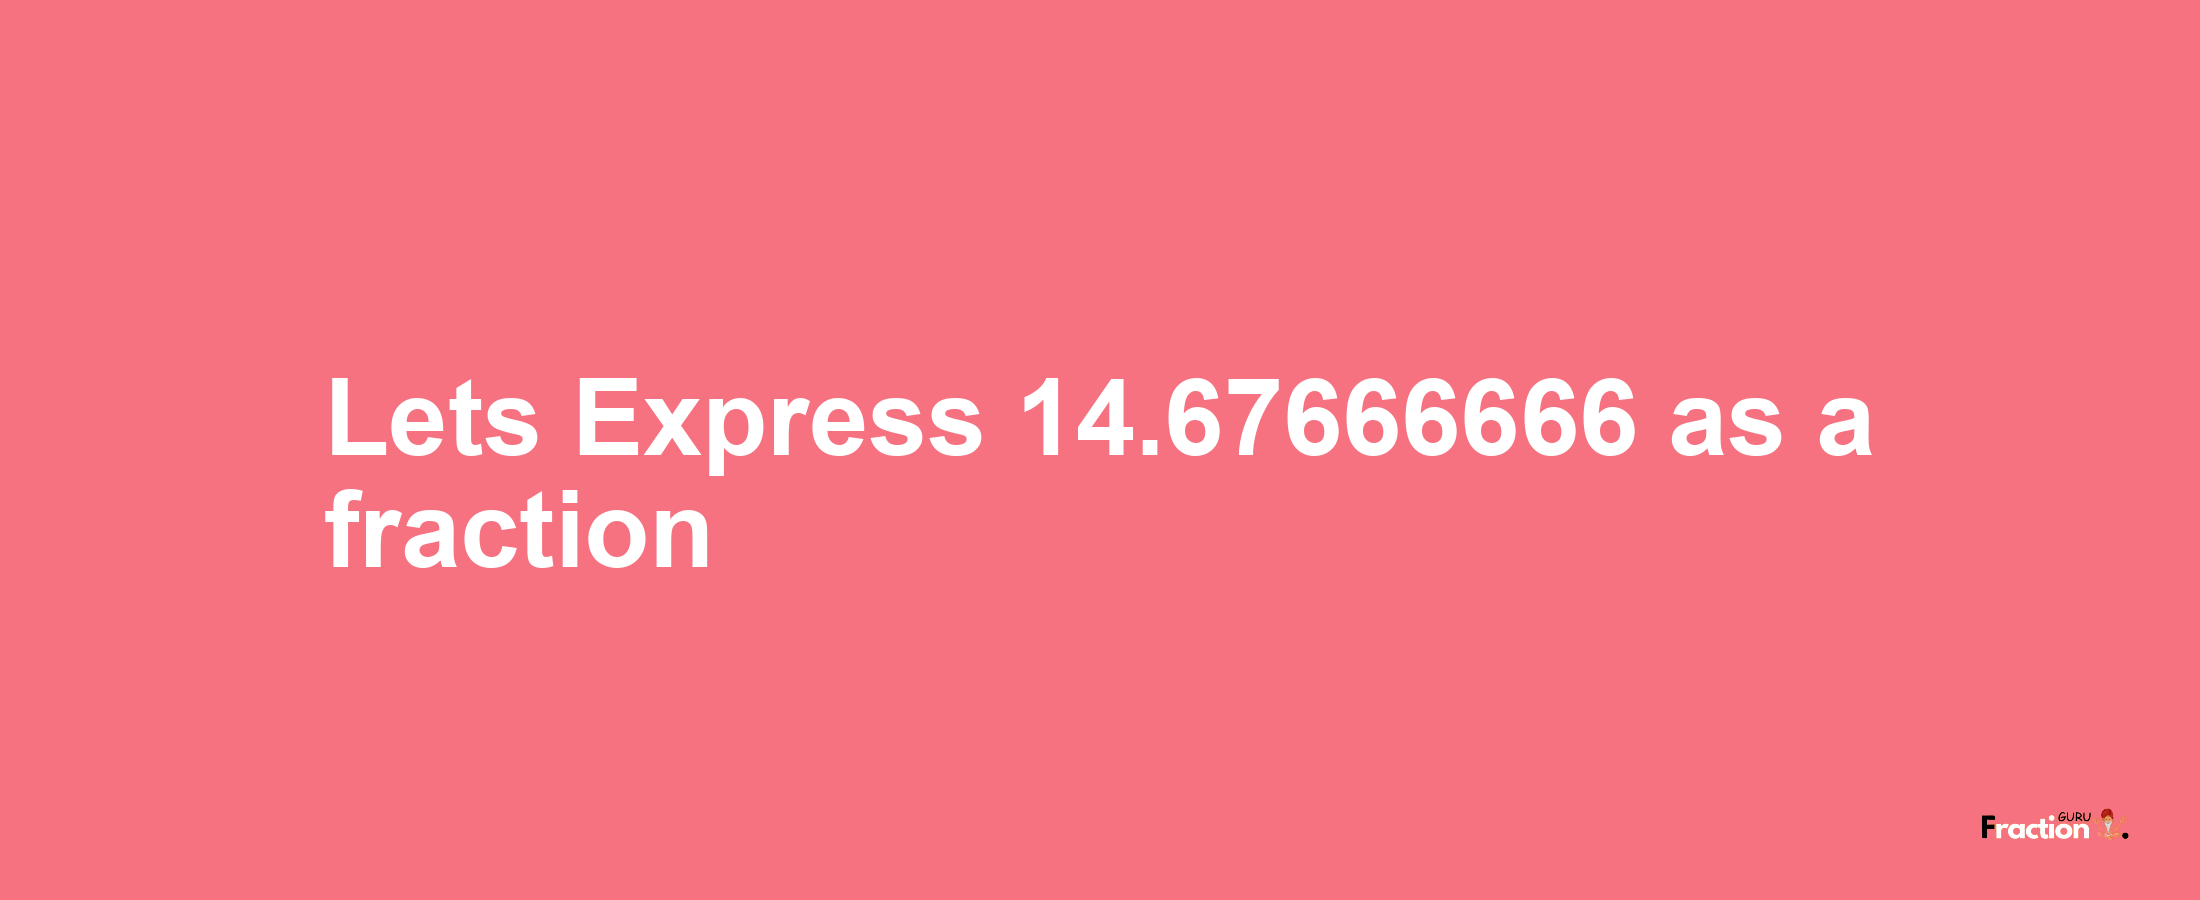 Lets Express 14.67666666 as afraction